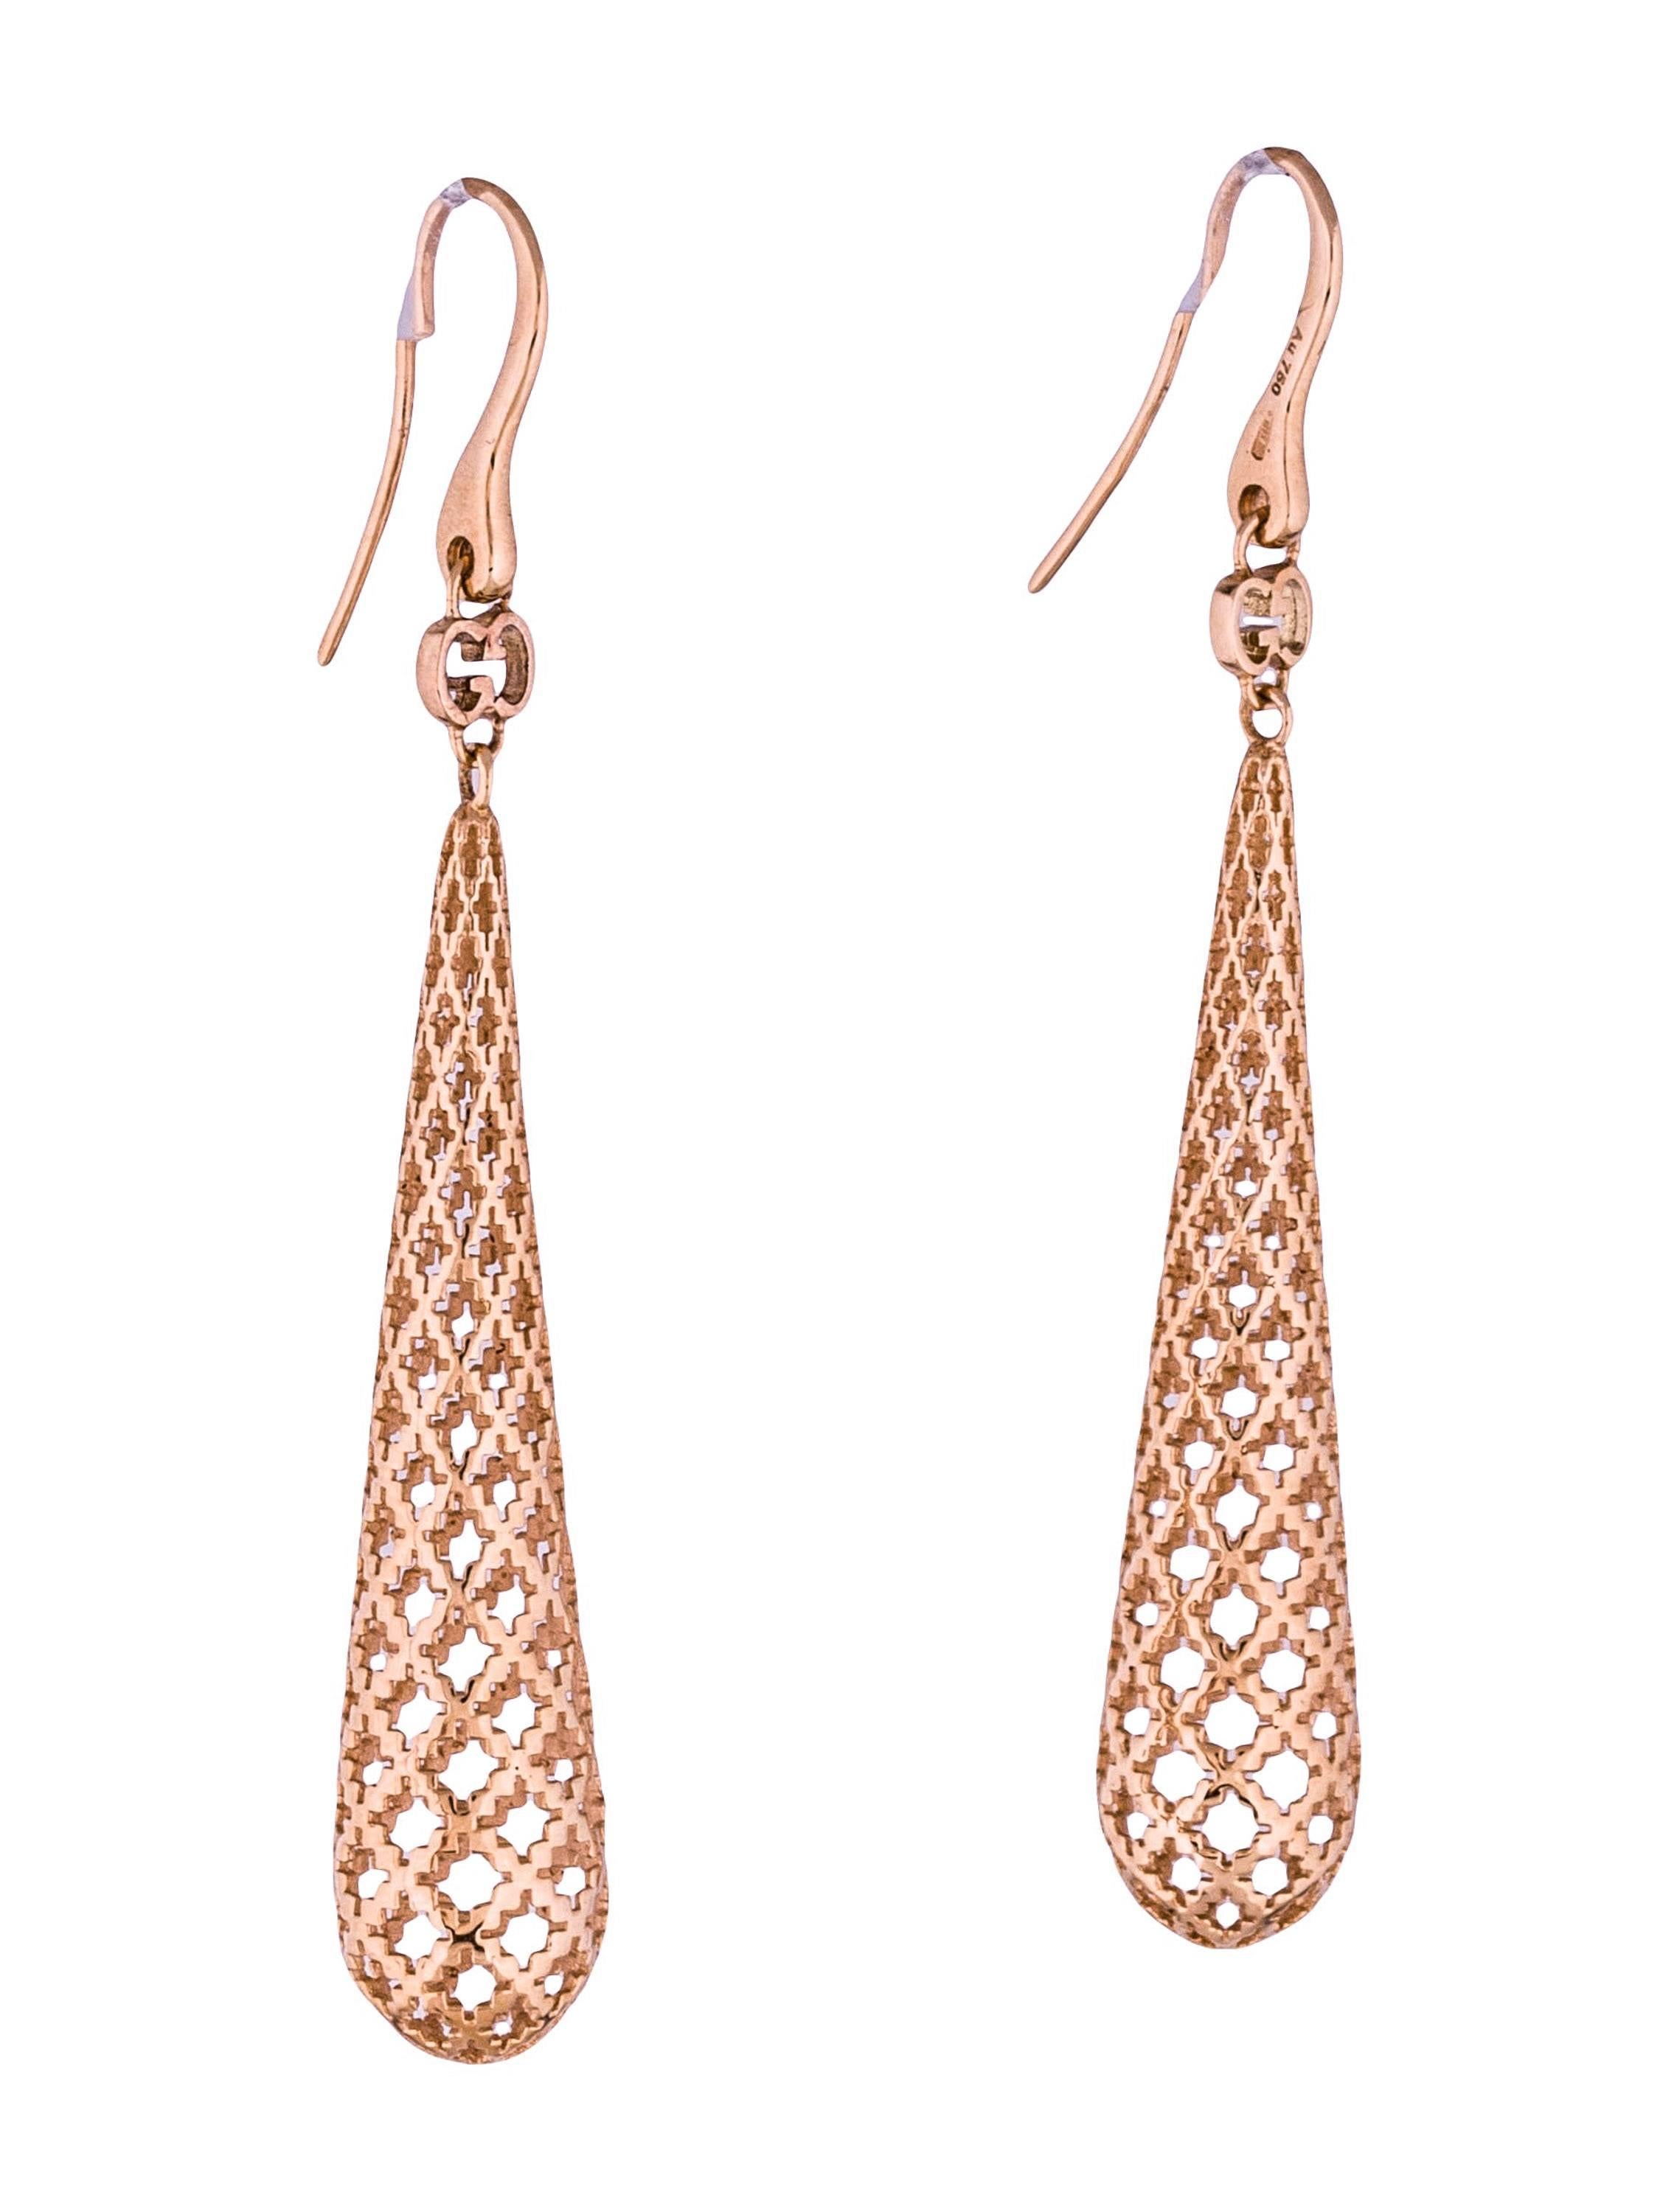 The Diamantissima Drop Earrings, inspired by a design from the '70s-a hallmark era of the House-is elevated in 18k rose gold. 
This jewel wants to call its own tradition and passion typical of any handmade work, combining it to a light simple shape.